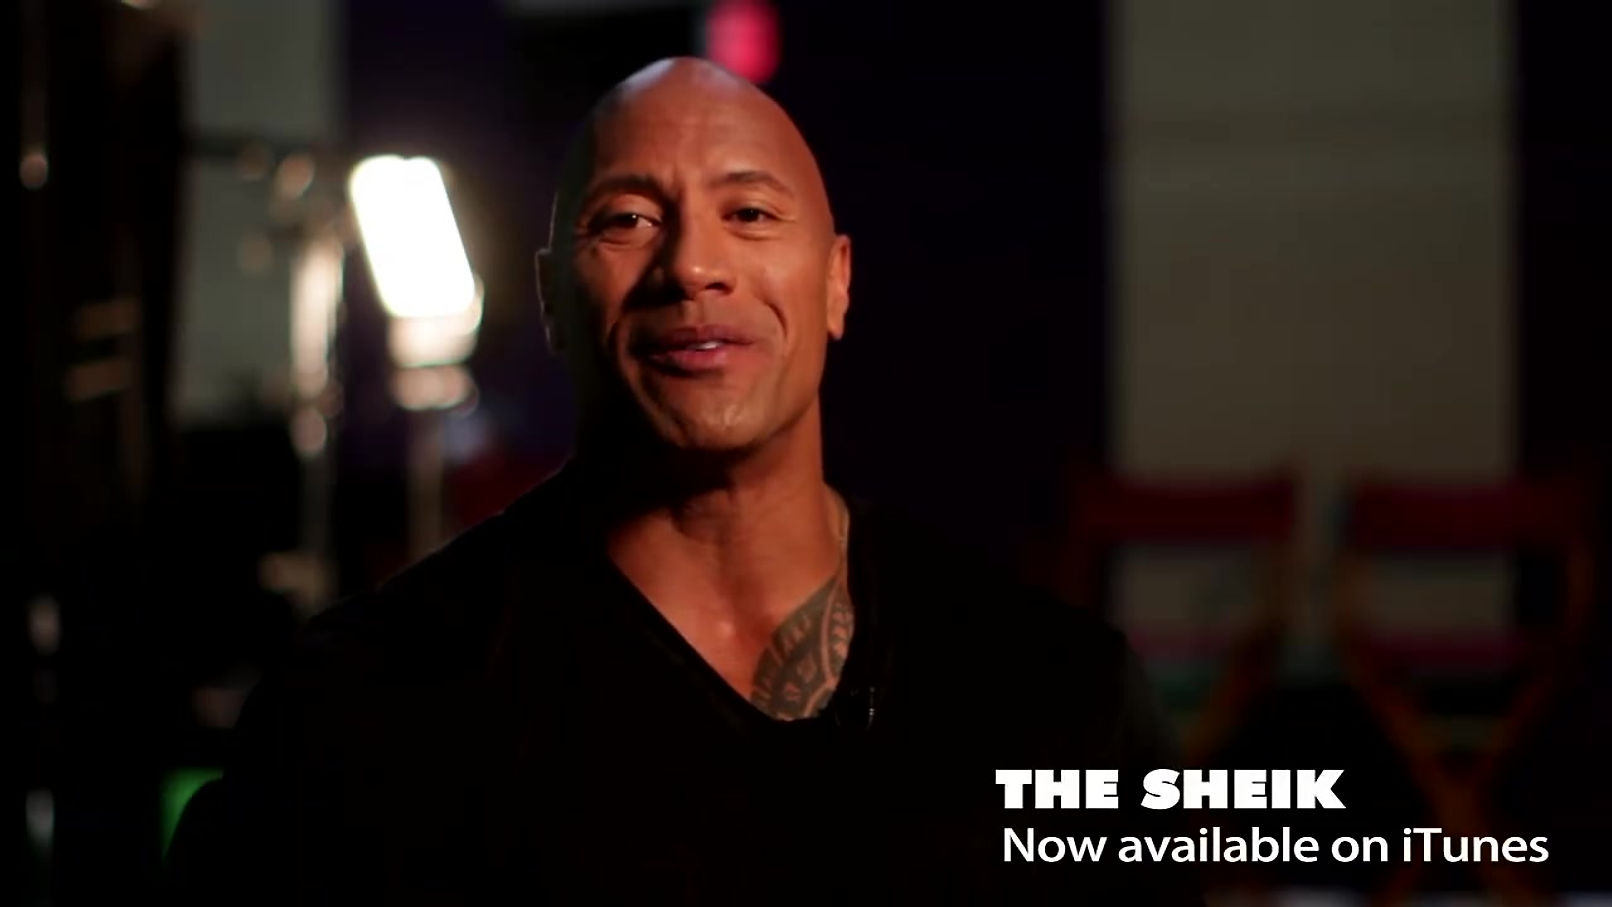 The Rock Talks About The Sheik (2014)